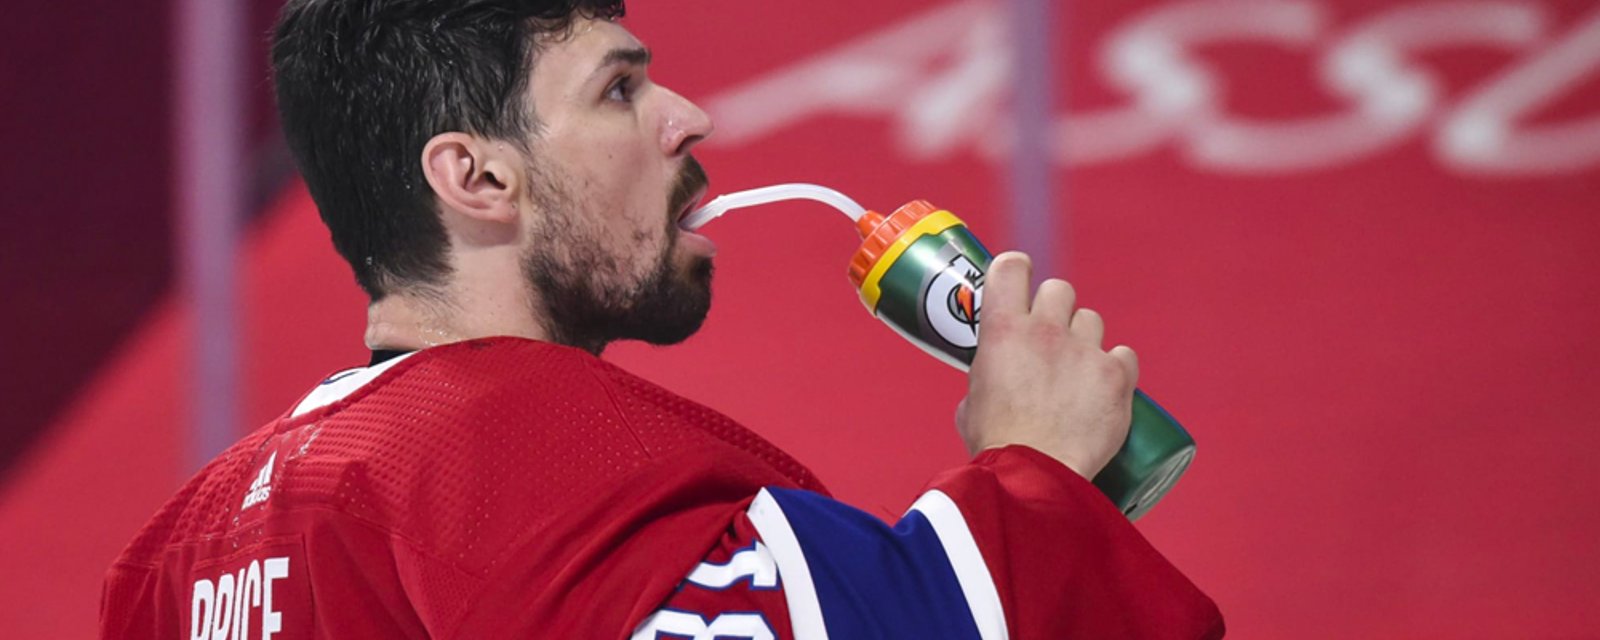 Carey Price: “See you in Seattle”